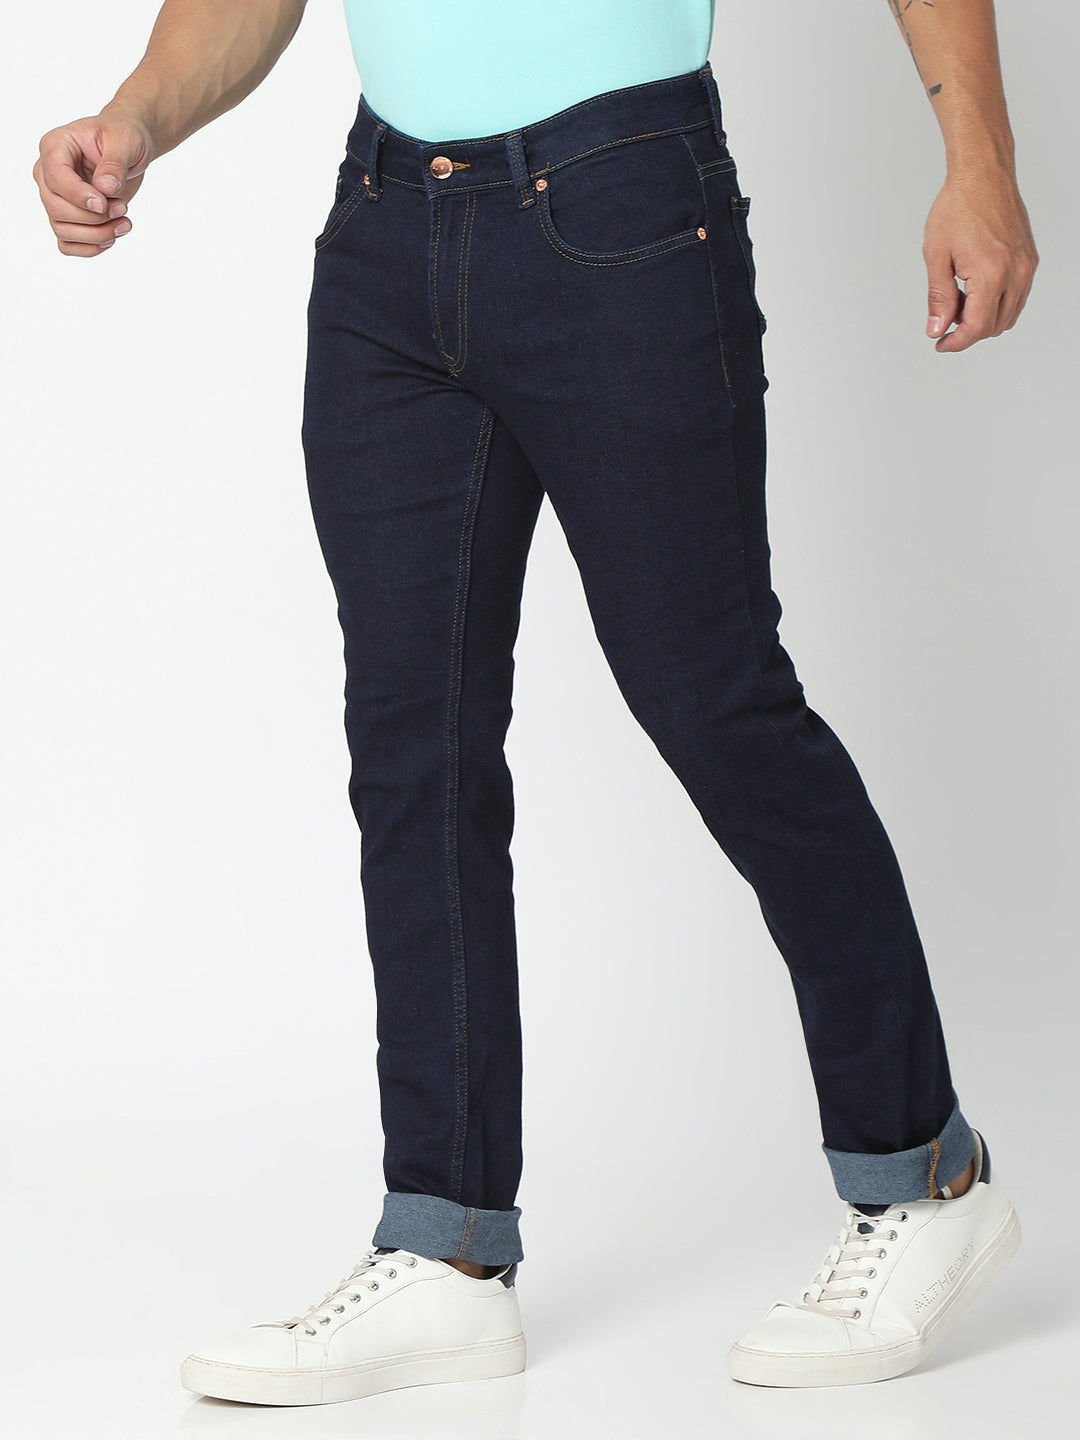 Spykar - Shop Jeans and Casual wear for men and women in India